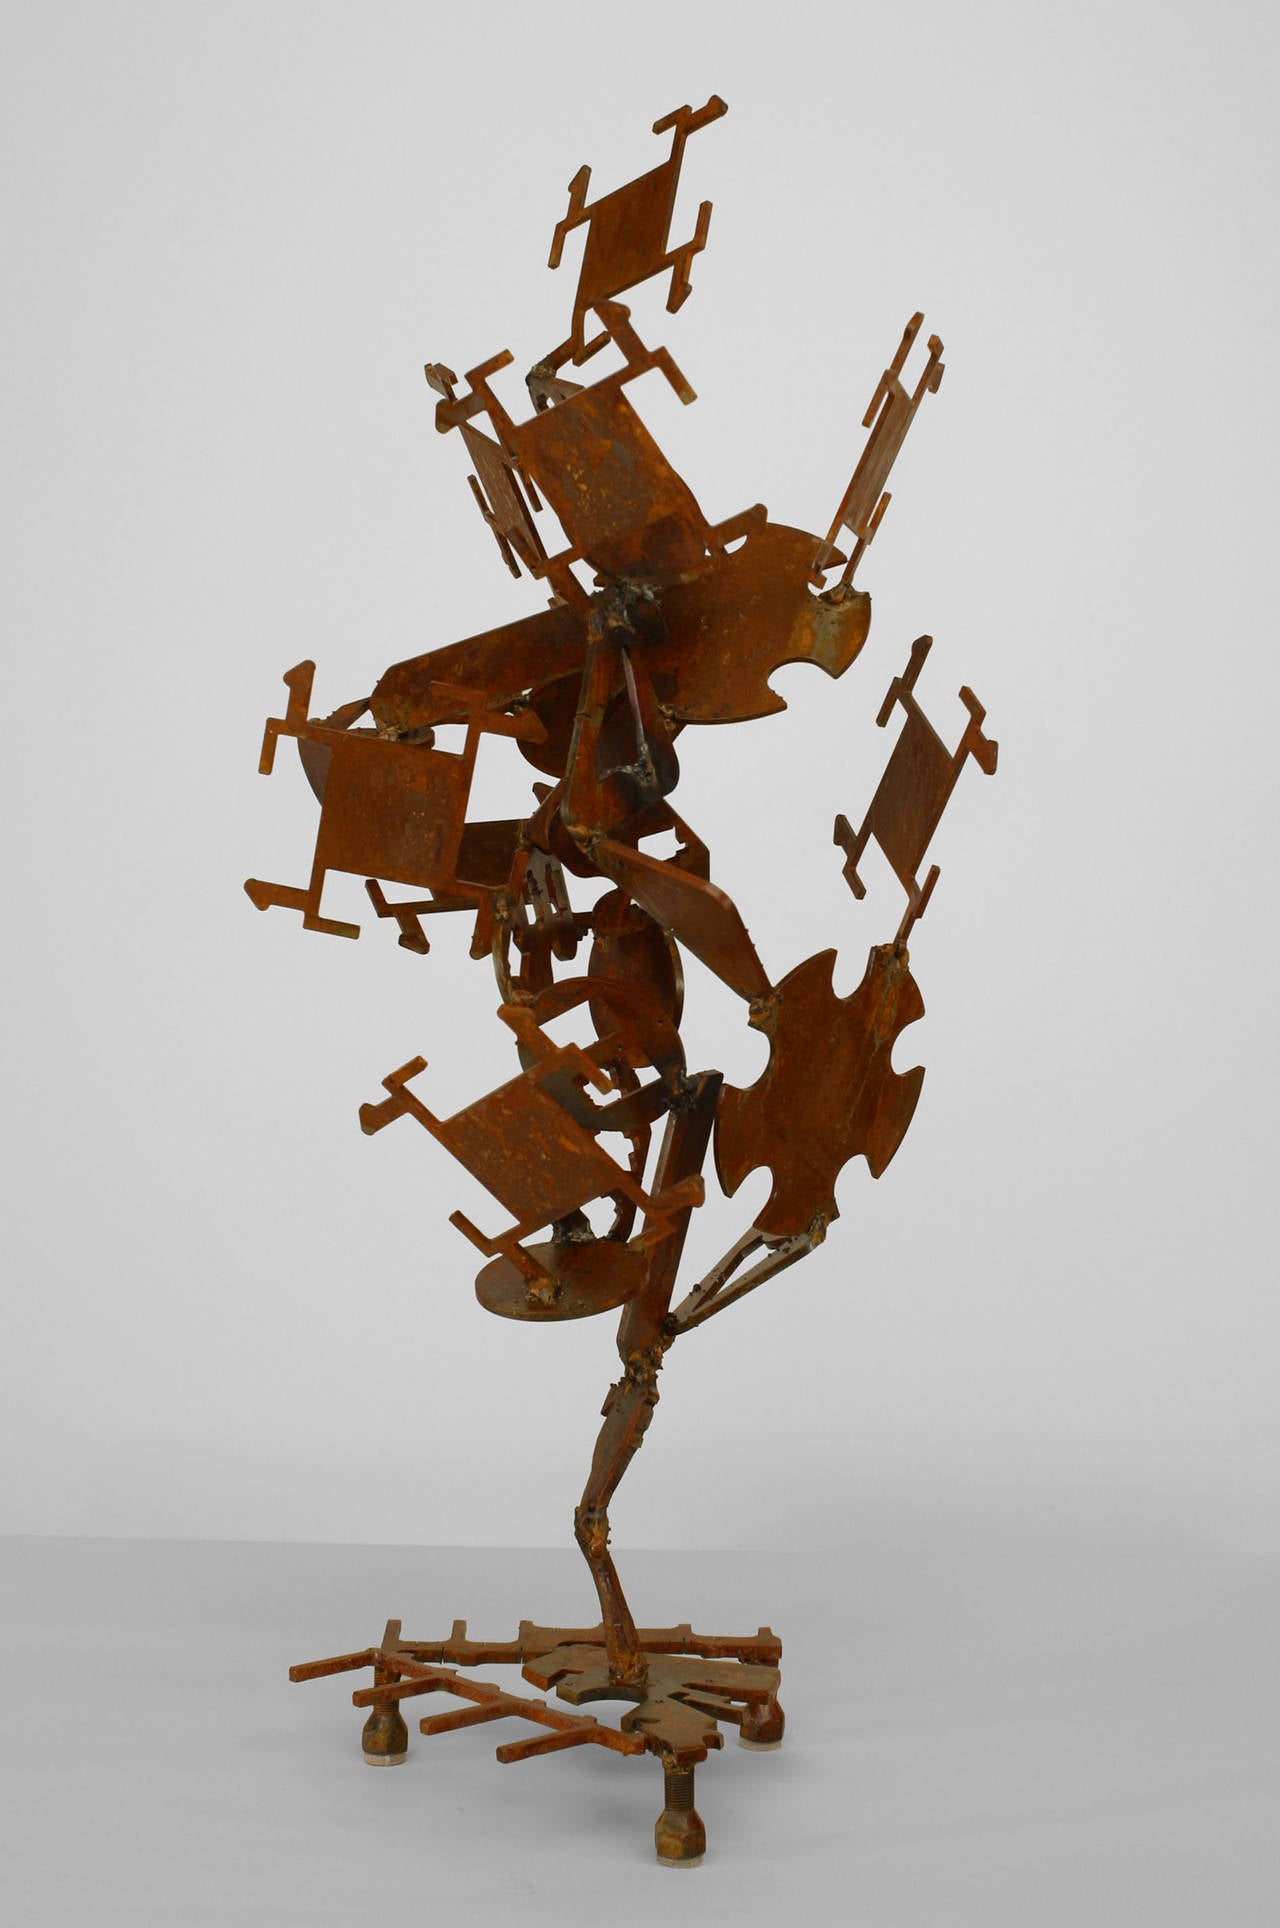 American Post-War Design Brutalist abstract sculpture composed of welded iron shapes with a rust patina.
